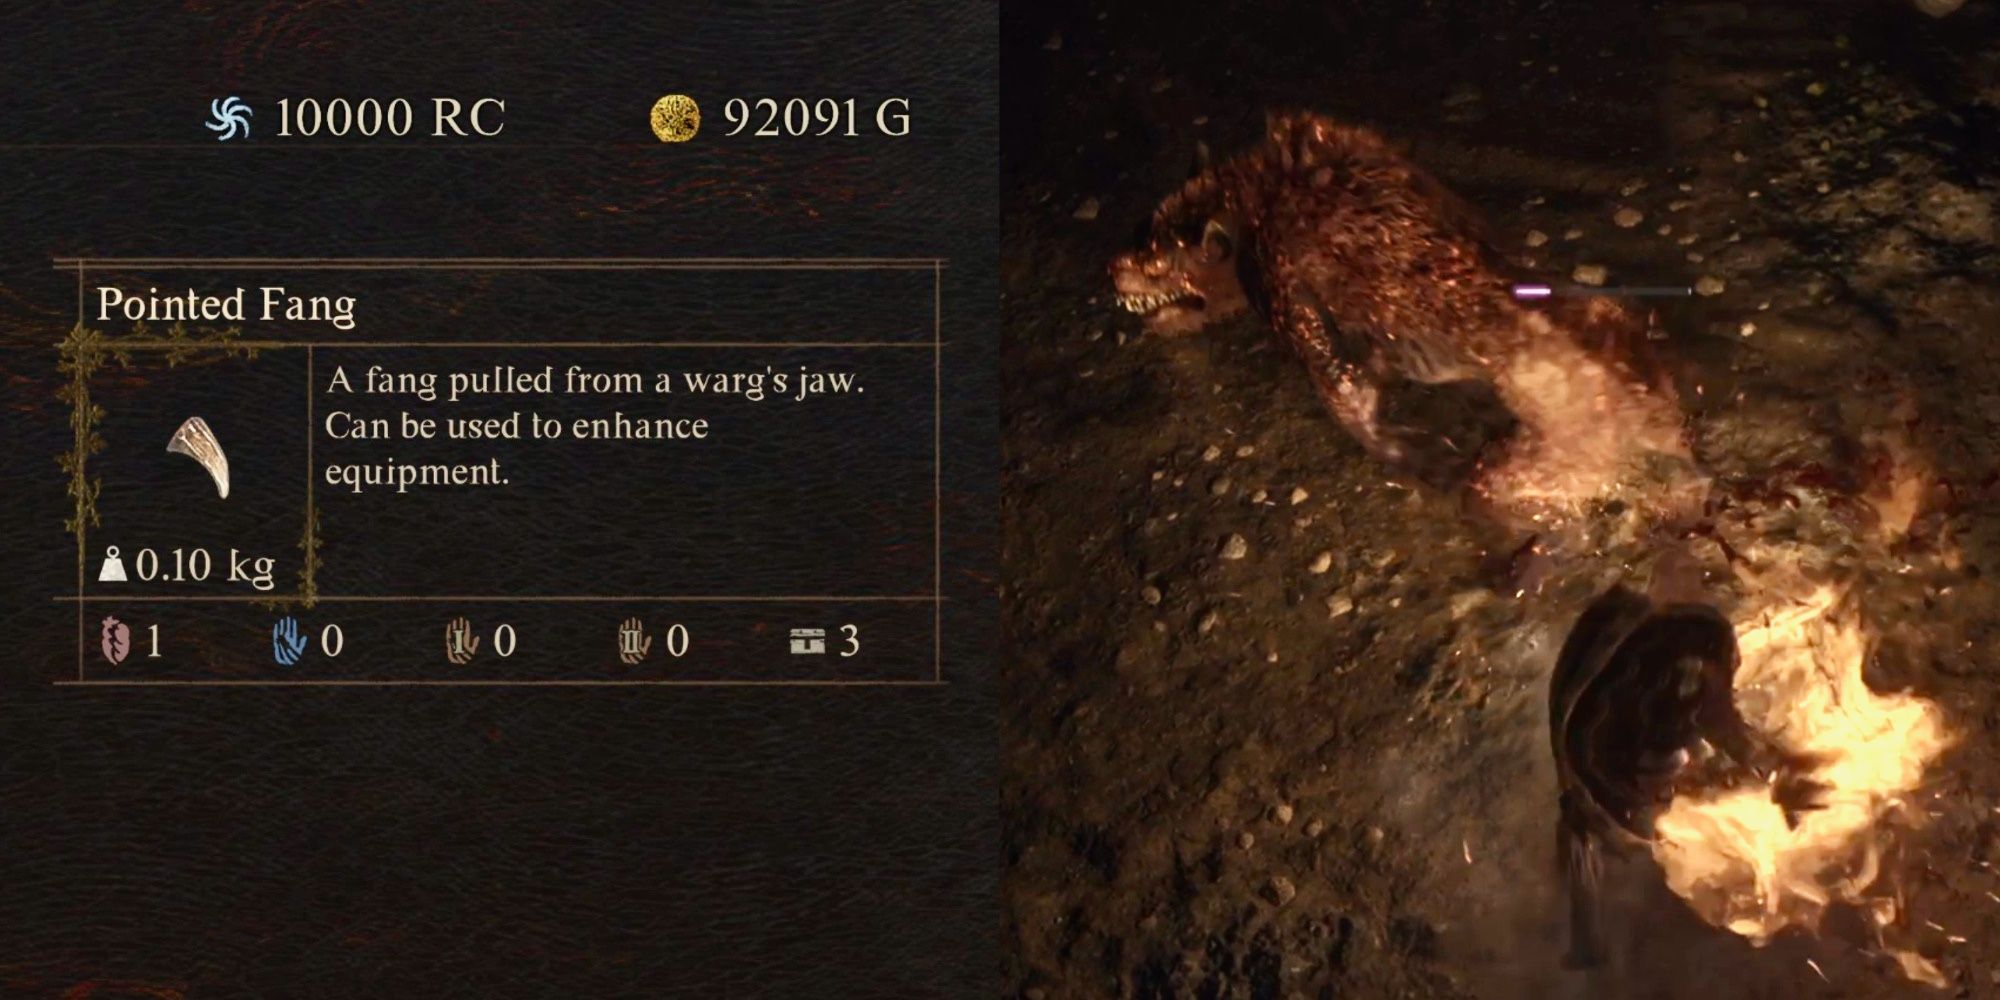 Pointed Fang Featured Image in Dragon's Dogma 2